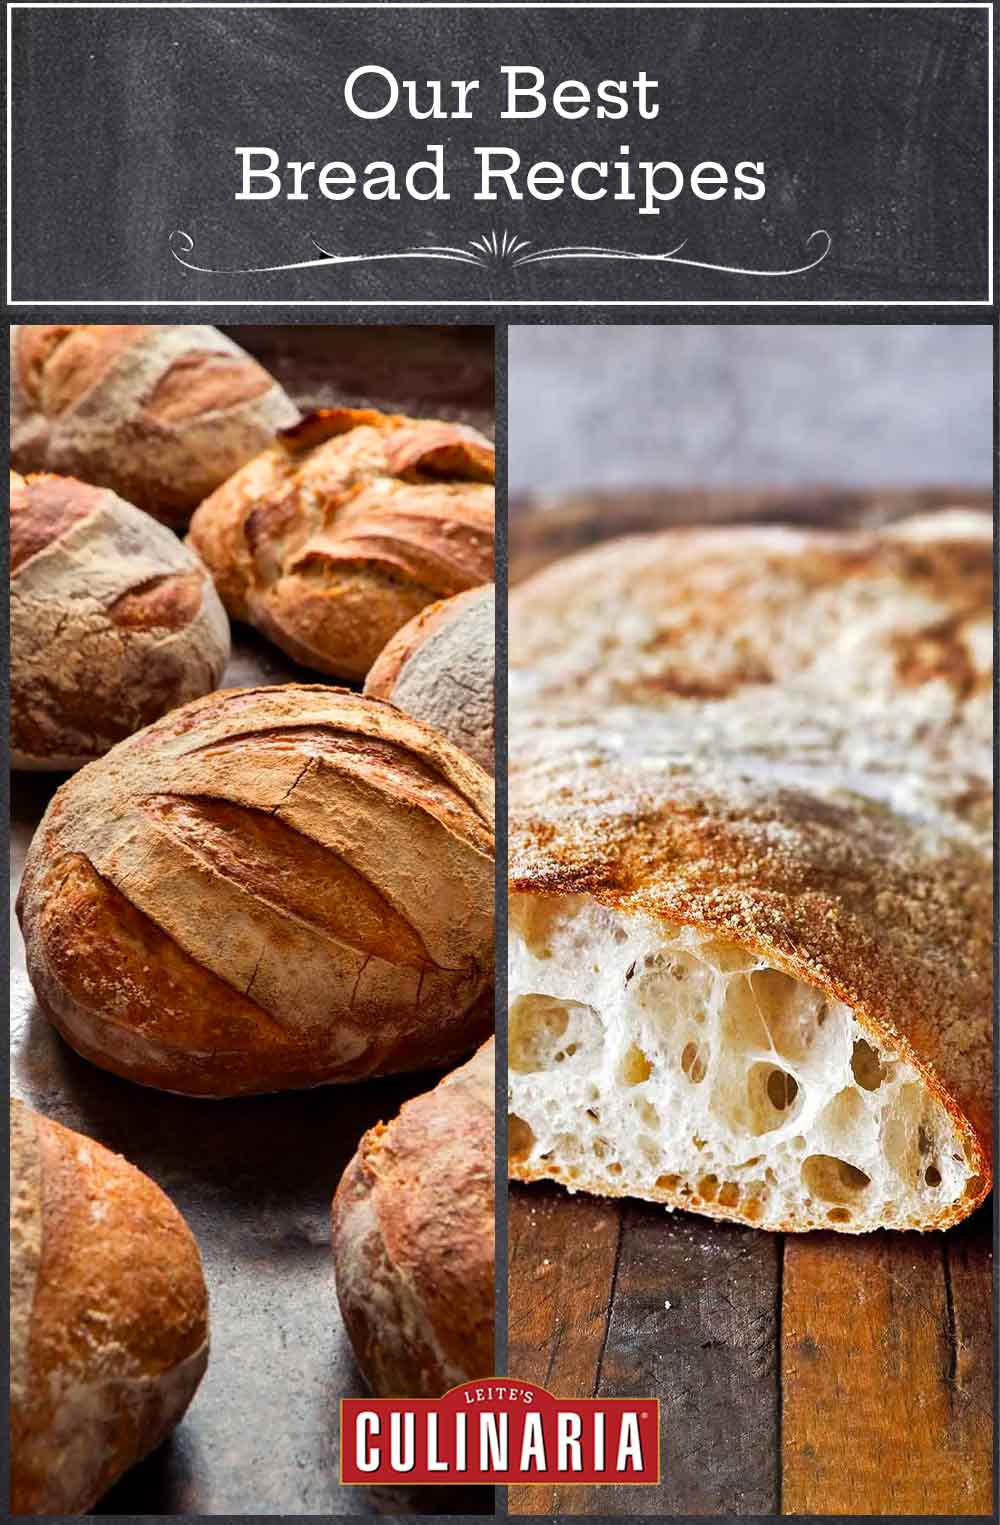 Images of two of the 27 bread recipes -- no knead 5 minute artisan and ciabatta.